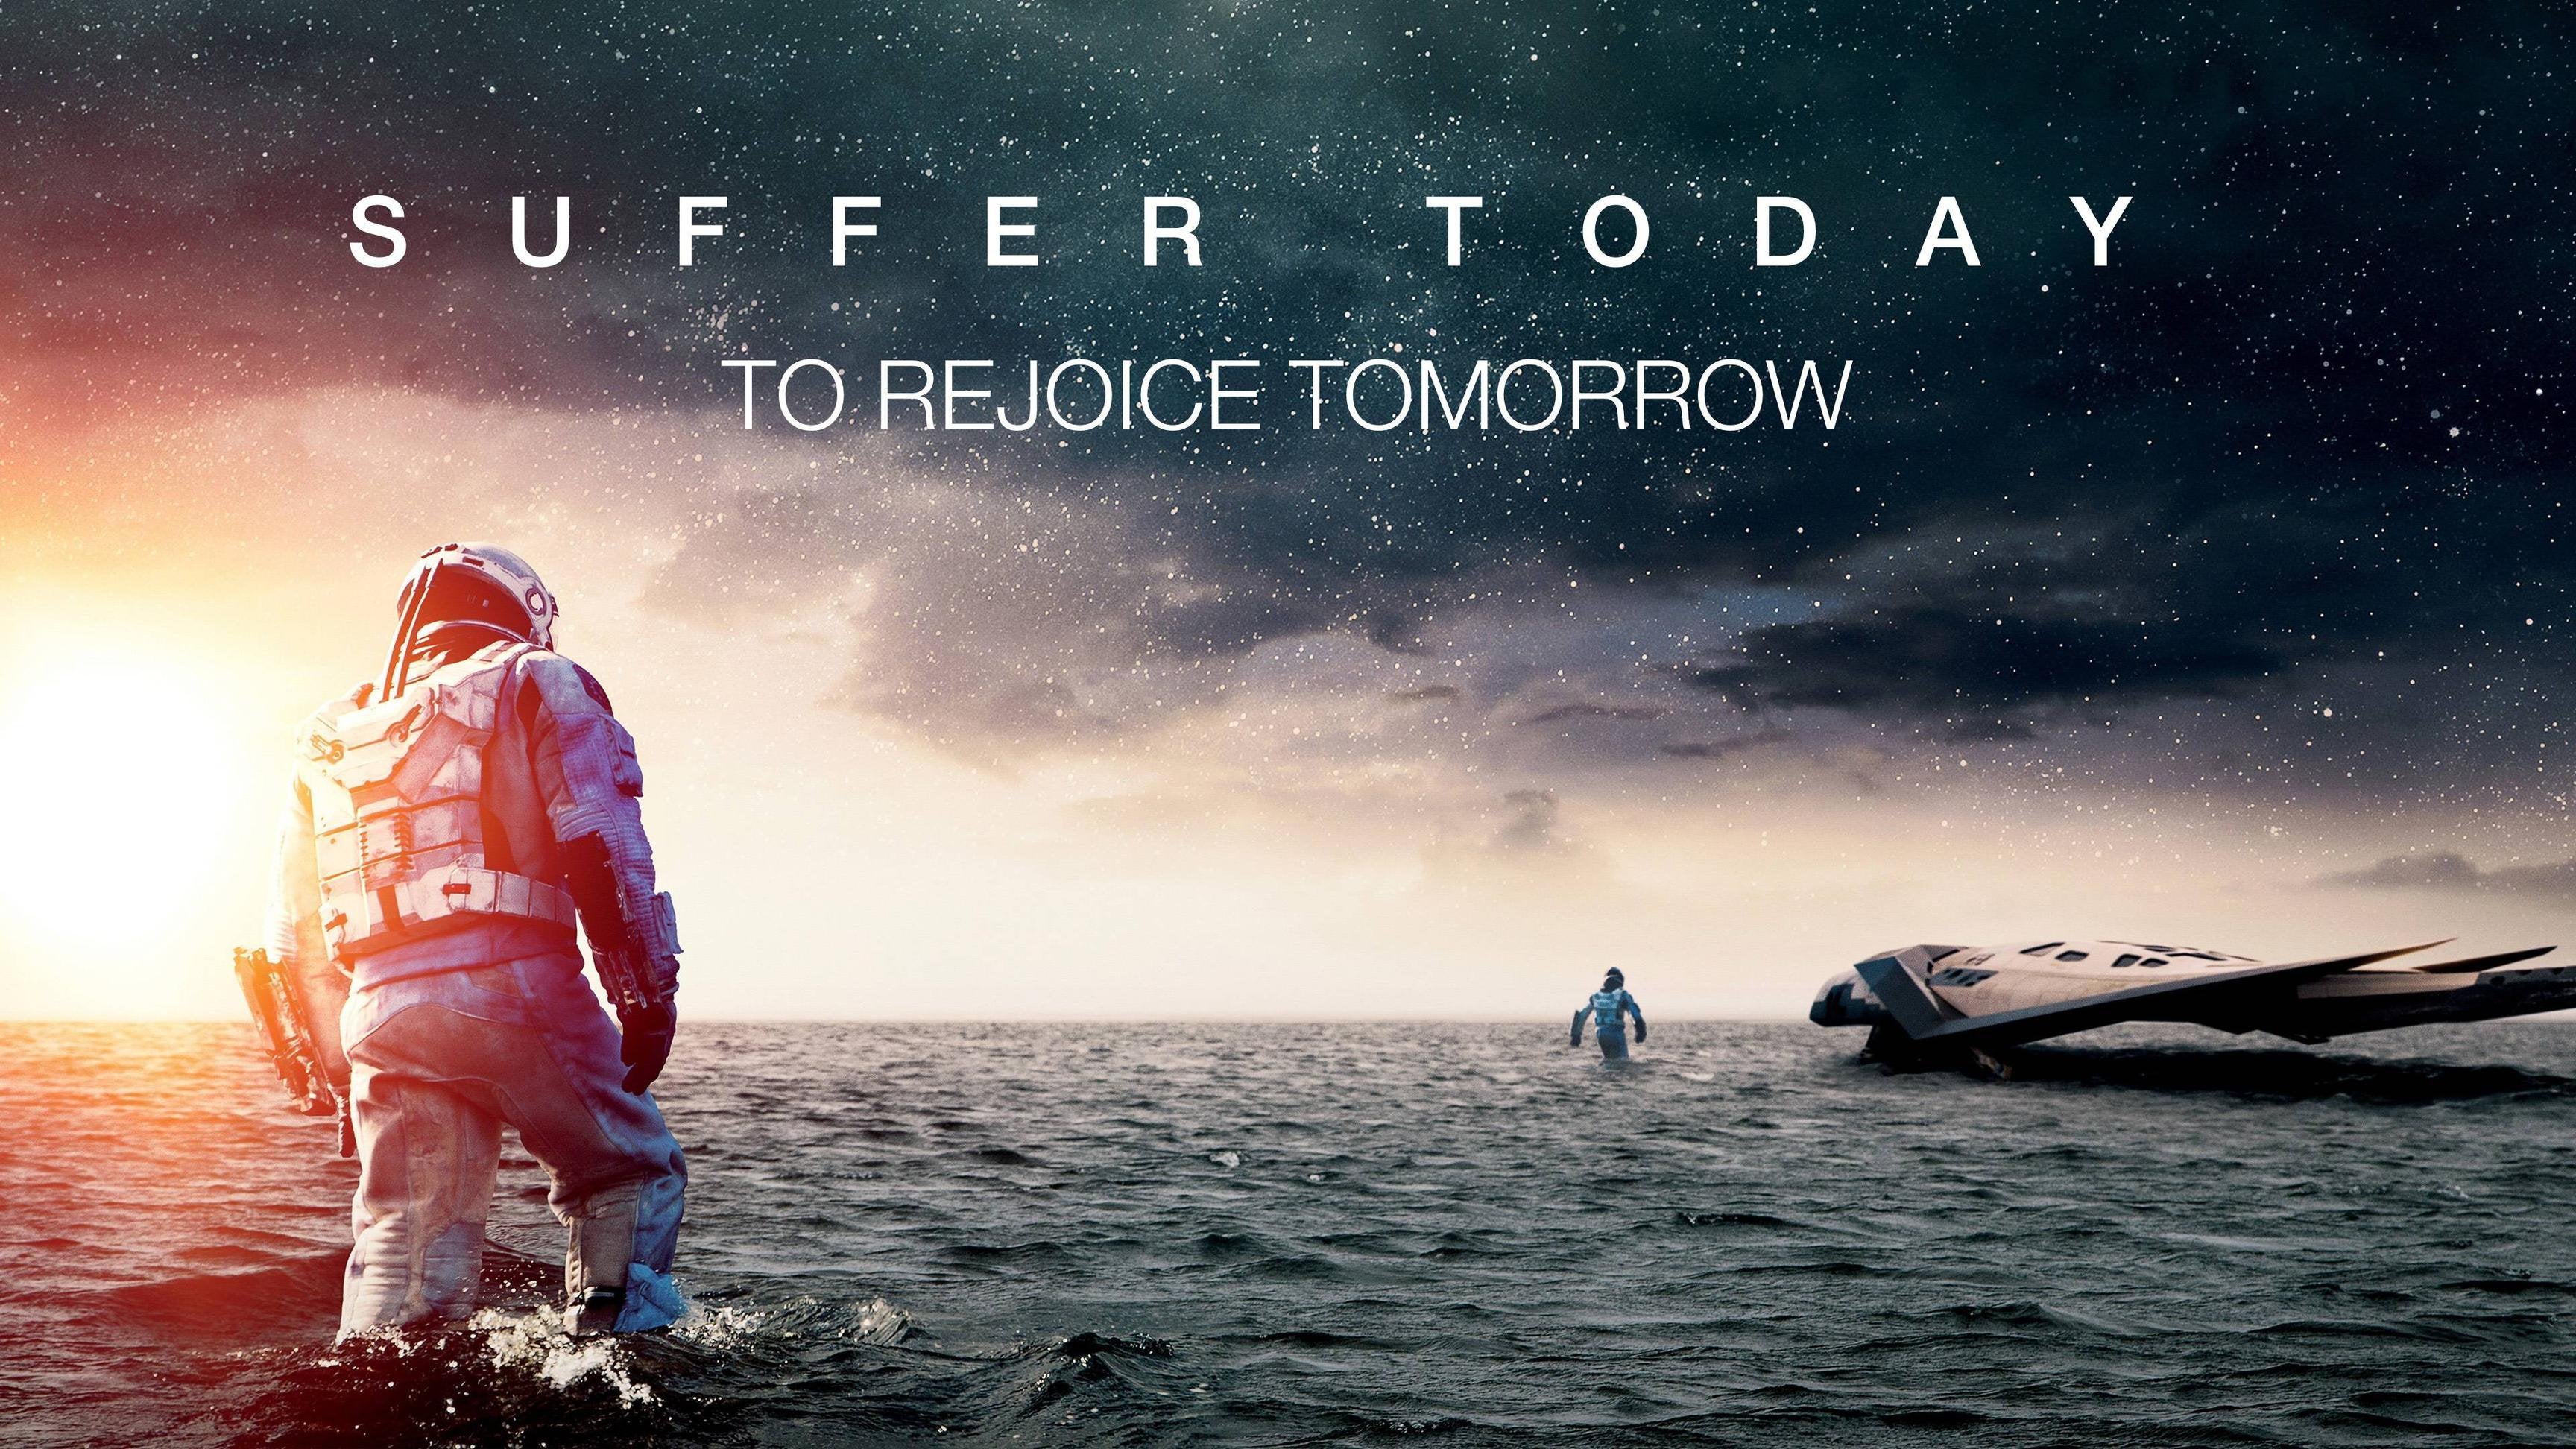 Suffer today to rejoice tomorrow